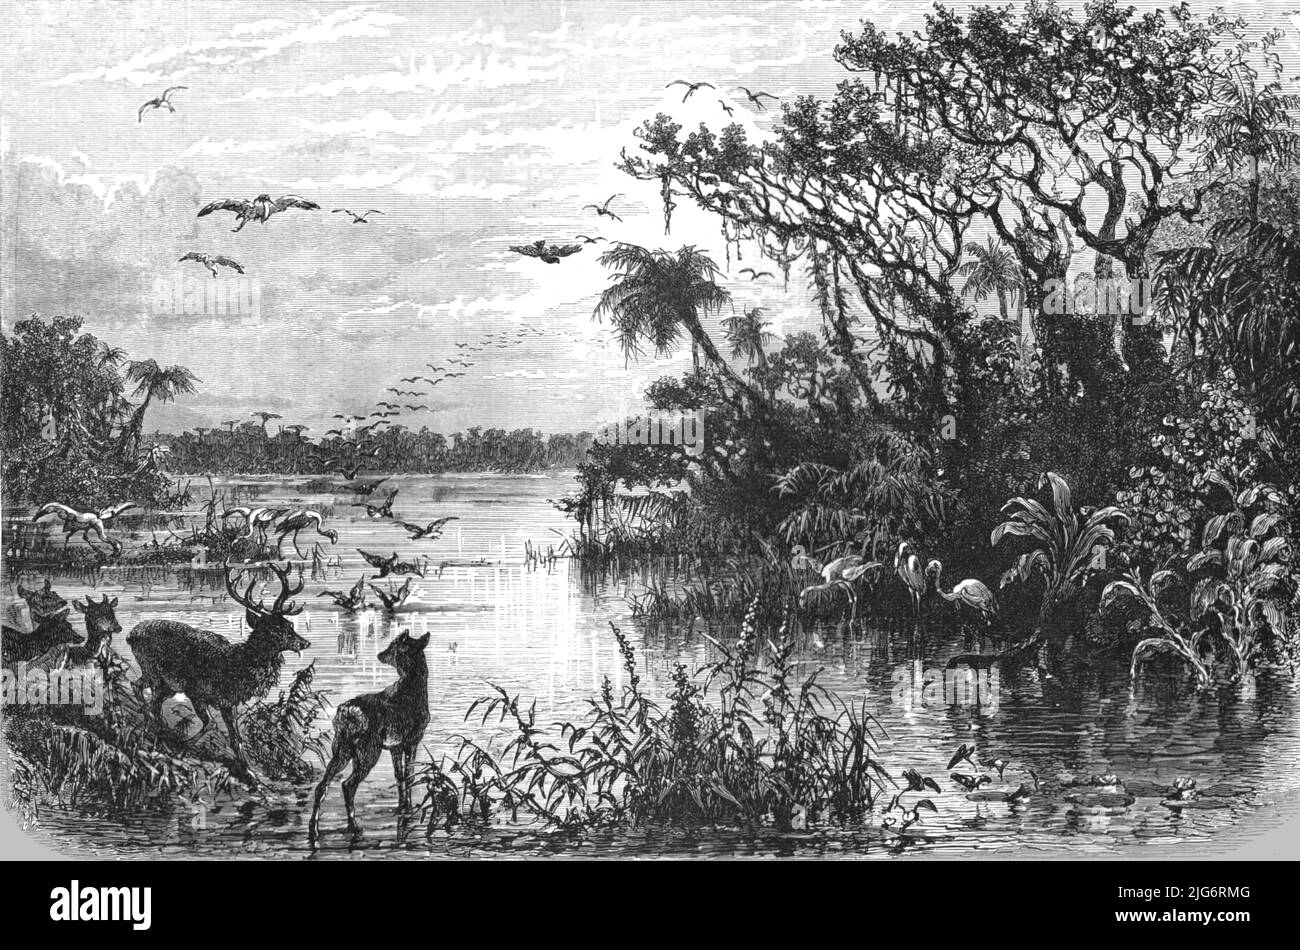 'Scene on a Creek, Tributary to the St. John's, Florida; A Flying Visit to Florida', 1875. From, 'Illustrated Travels' by H.W. Bates. [Cassell, Petter, and Galpin, c1880, London] Belle Sauvage Works.London E.C. Stock Photo